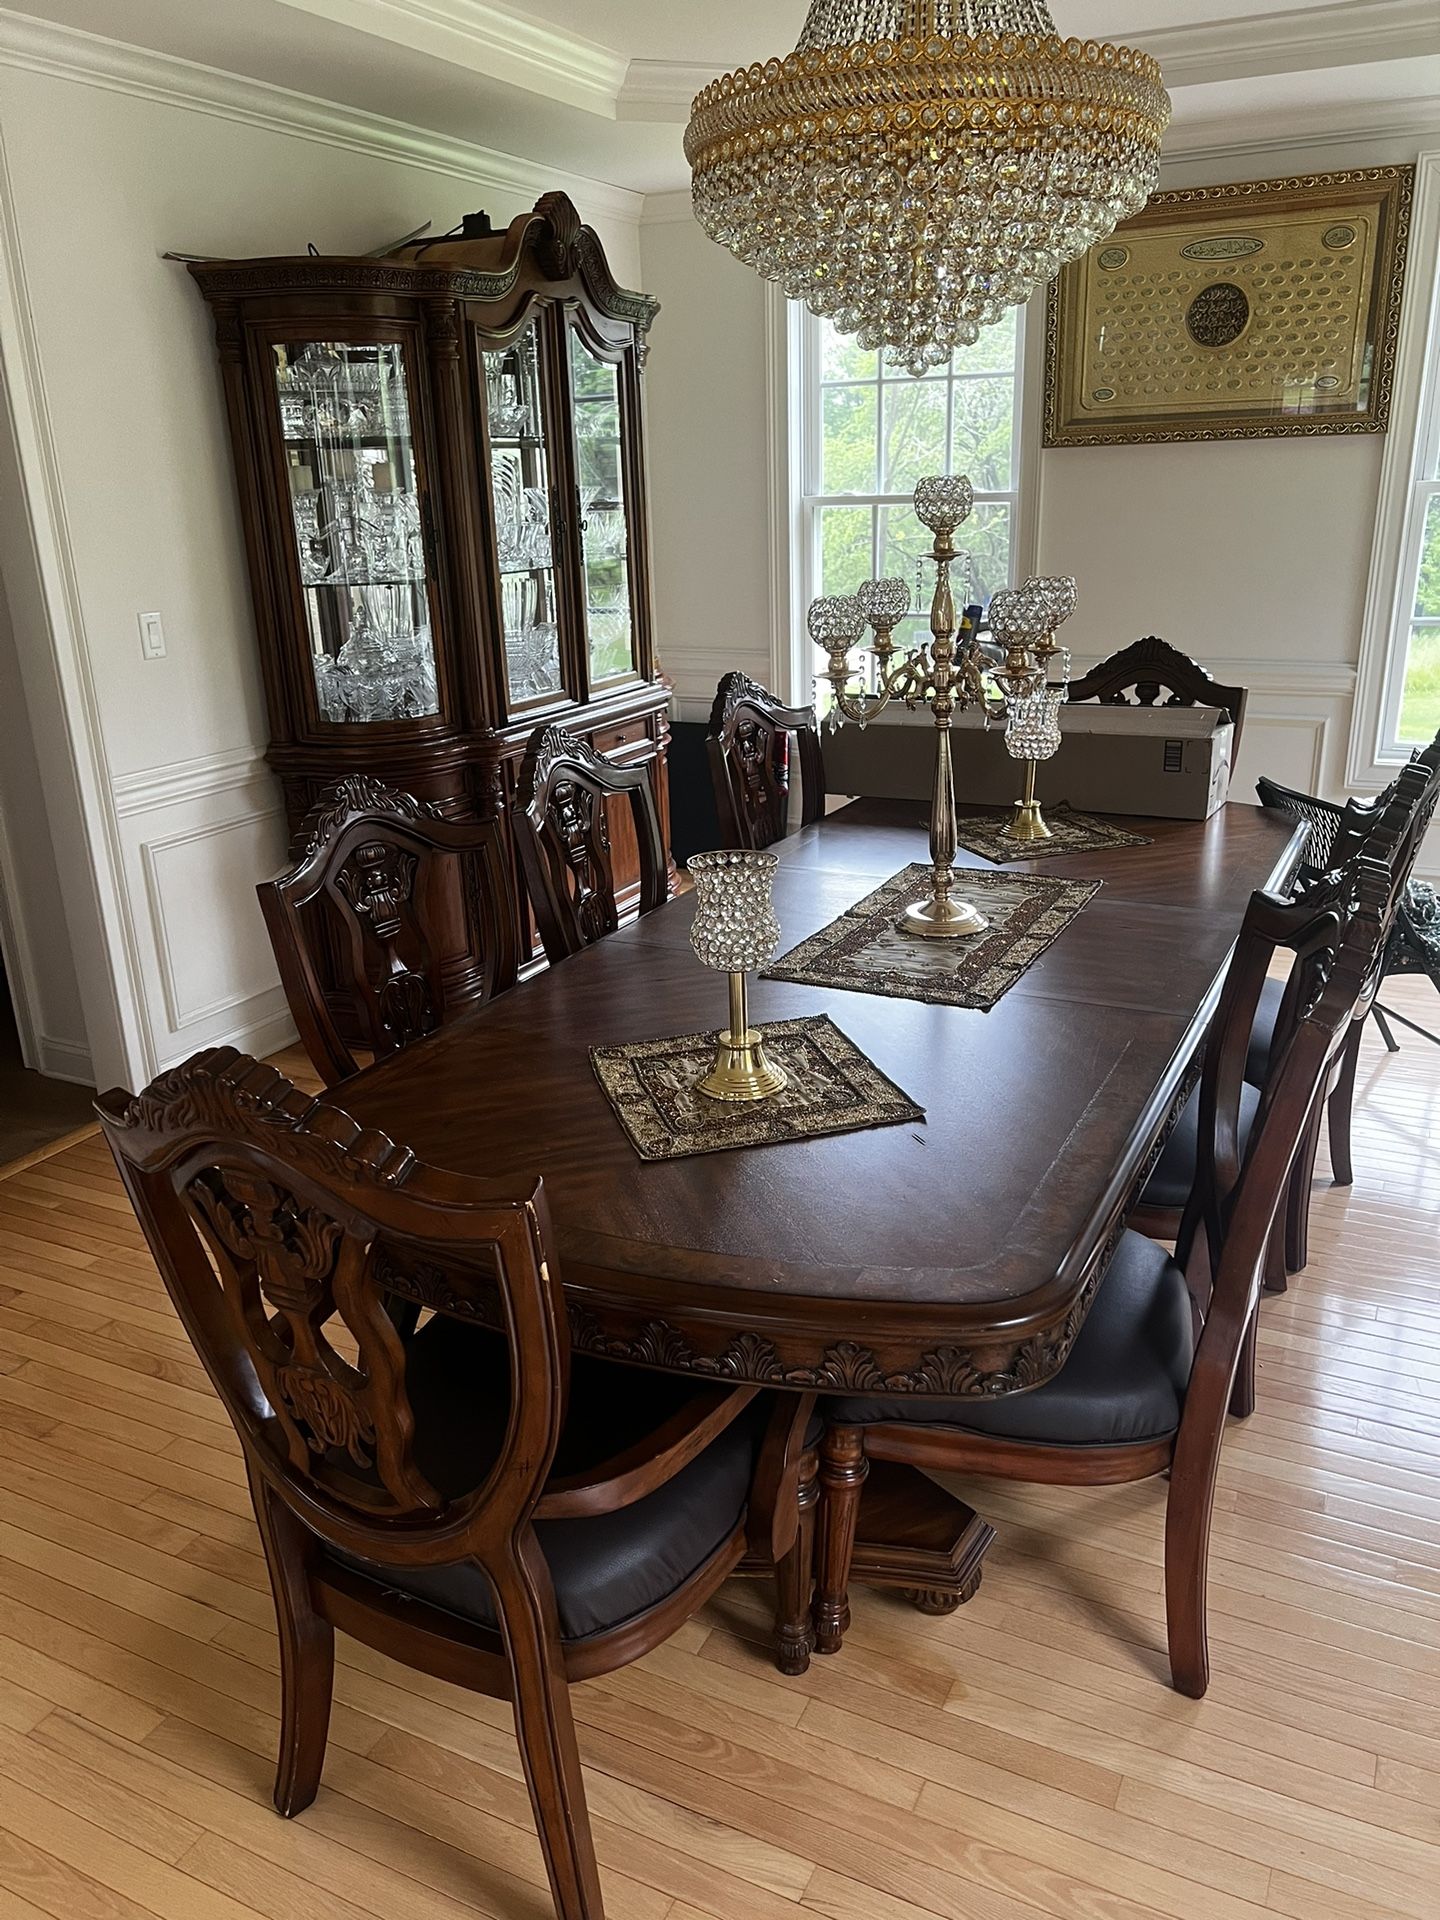 8 Chair Dinning Room With China Display